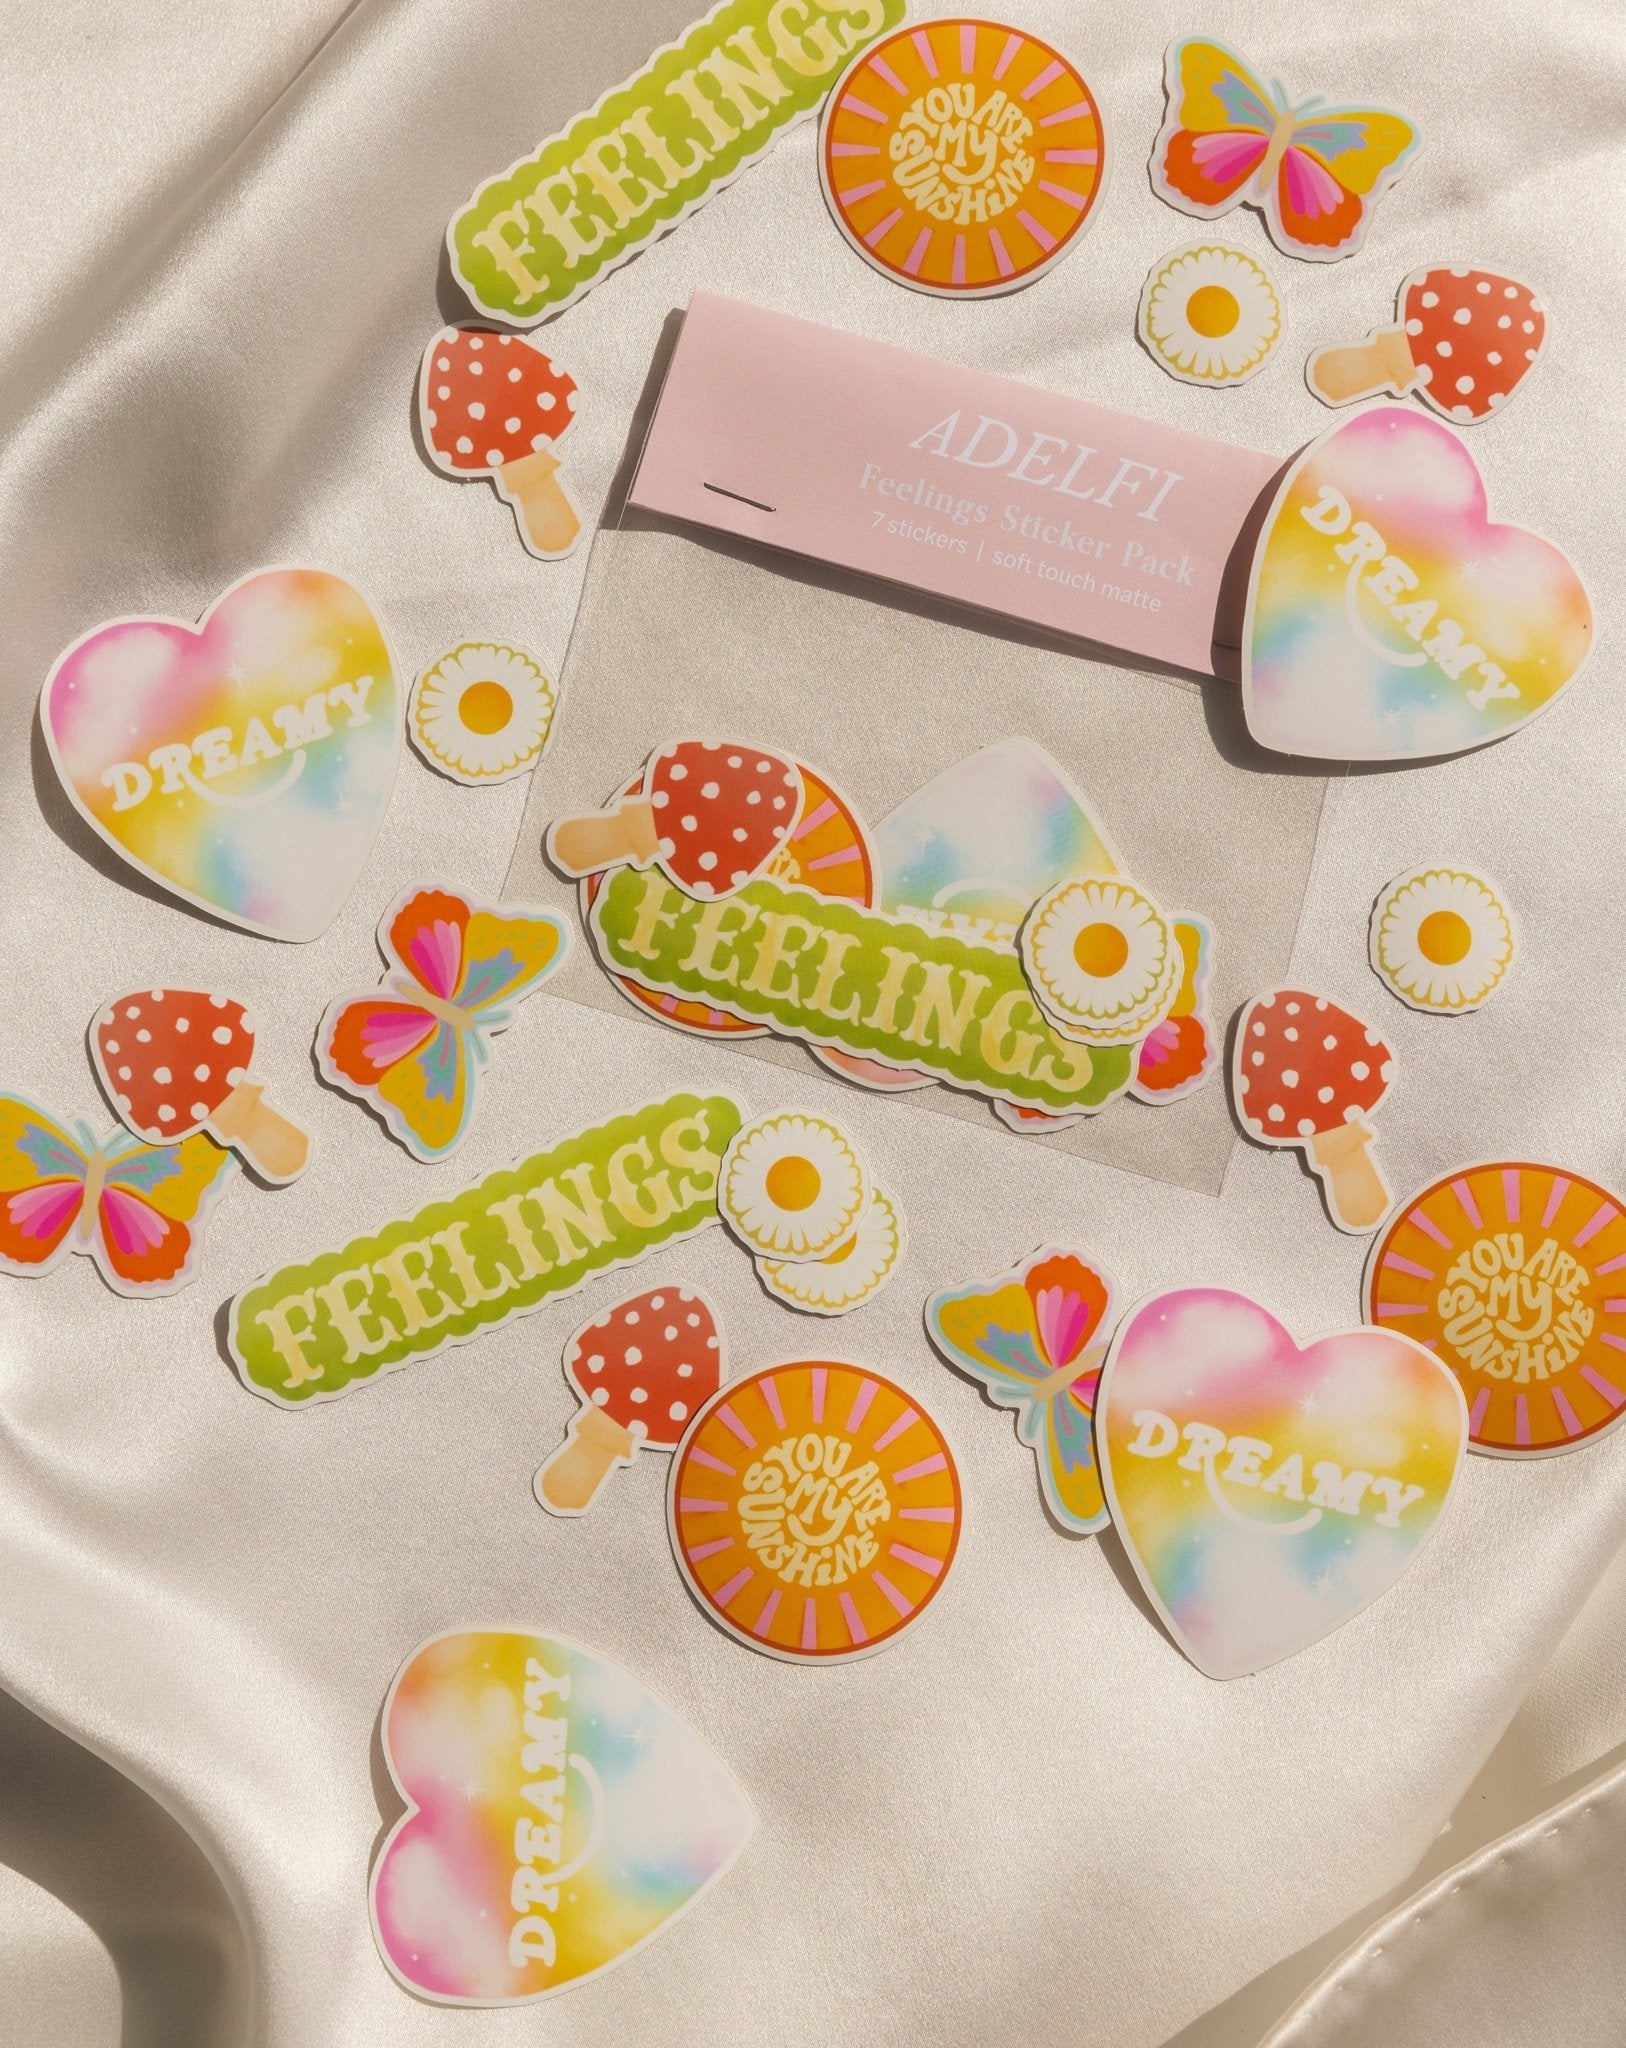 6 new Adelfi stickers: colorful butterfly, the word &#39;Feelings&#39; in all caps, two daisies, the words &#39;you are my sunshine&#39; in a sun, red mushroom, and the word &#39;Dreamy&#39; in a heart.